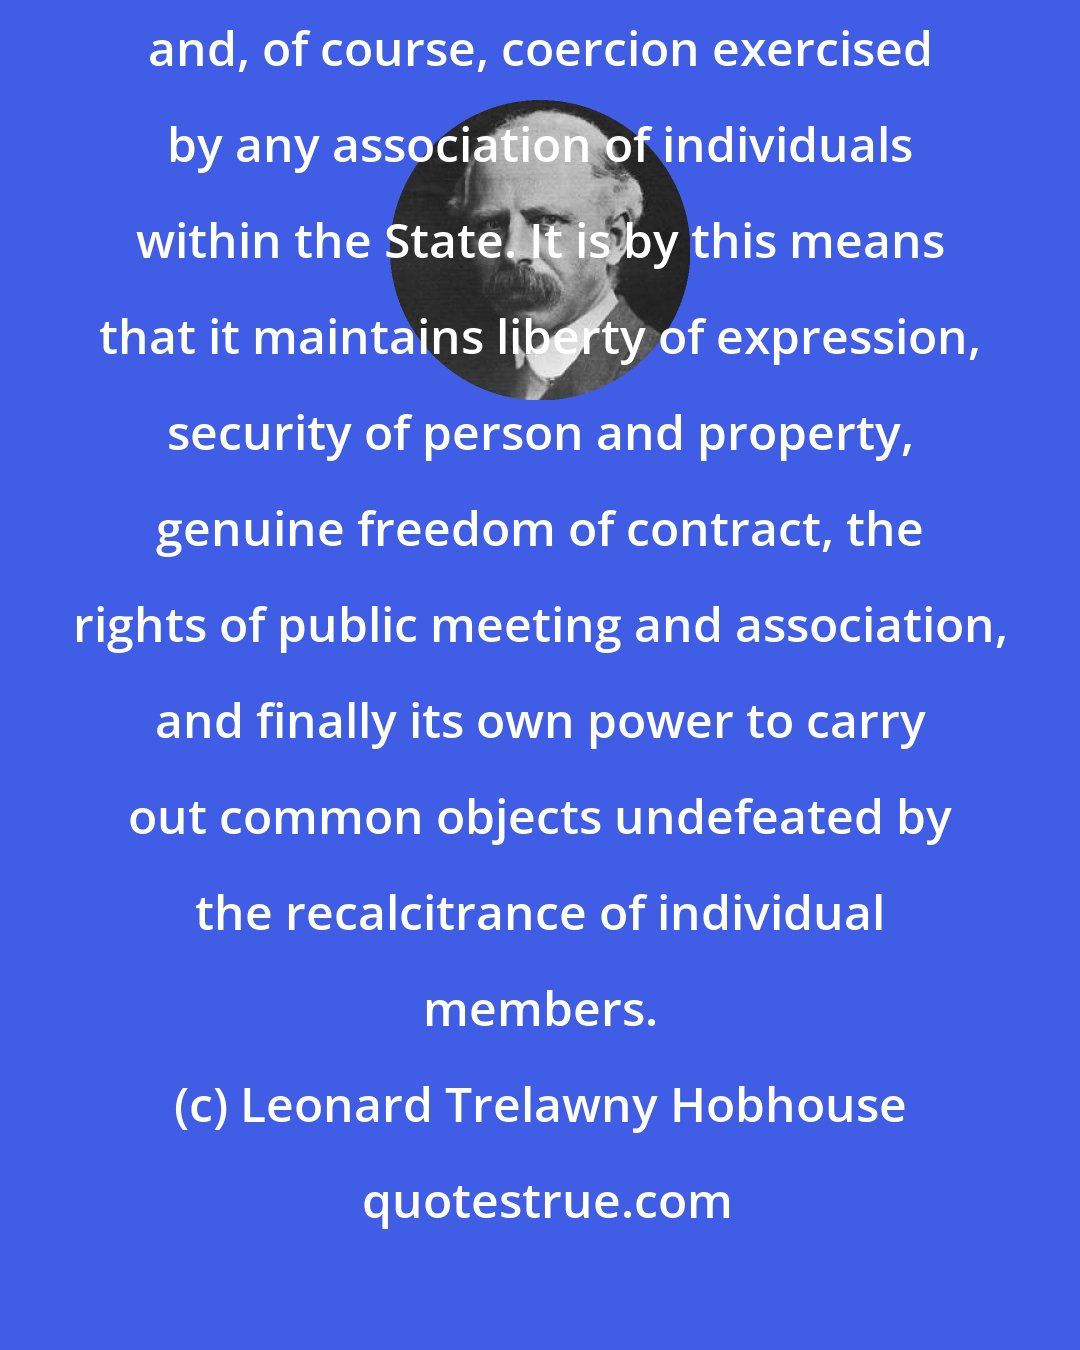 Leonard Trelawny Hobhouse: The function of State coercion is to override individual coercion, and, of course, coercion exercised by any association of individuals within the State. It is by this means that it maintains liberty of expression, security of person and property, genuine freedom of contract, the rights of public meeting and association, and finally its own power to carry out common objects undefeated by the recalcitrance of individual members.